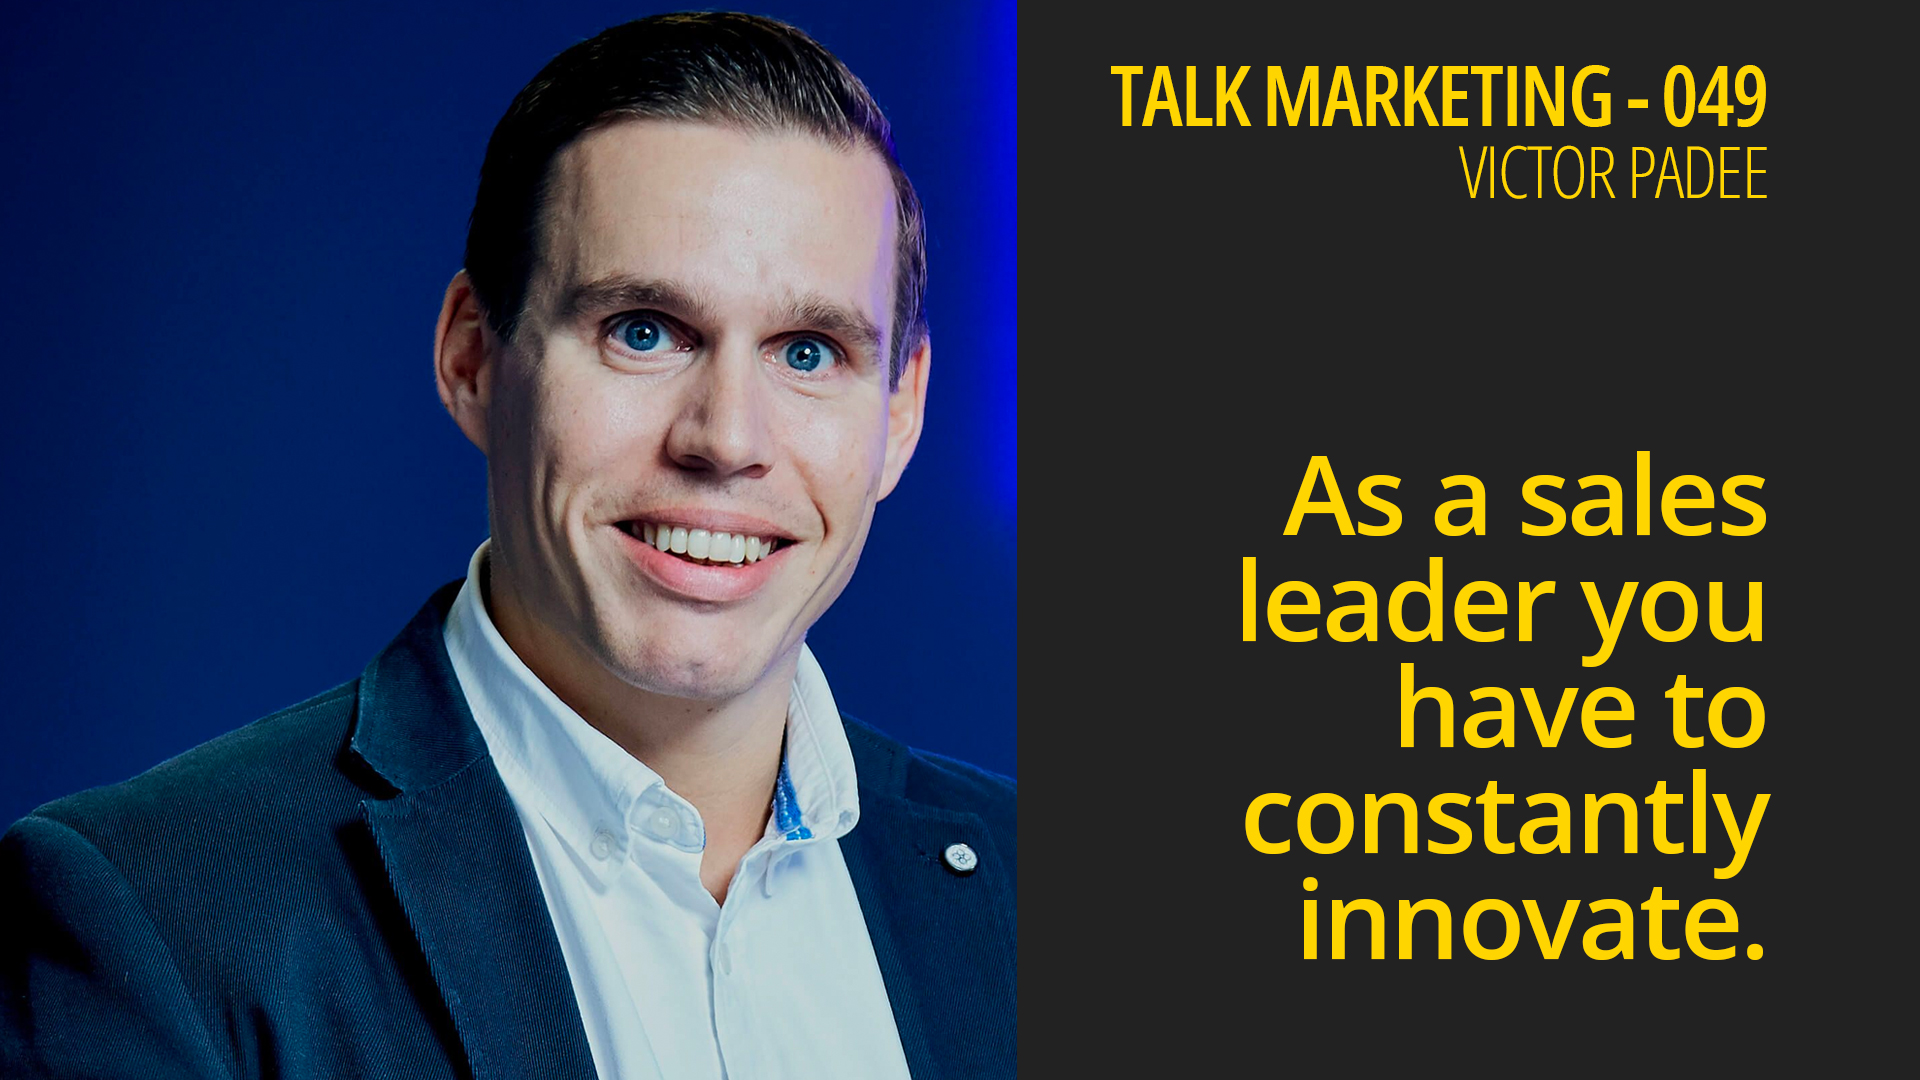 As a sales leader you have to constantly innovate – Talk Marketing 049 – Victor Padee